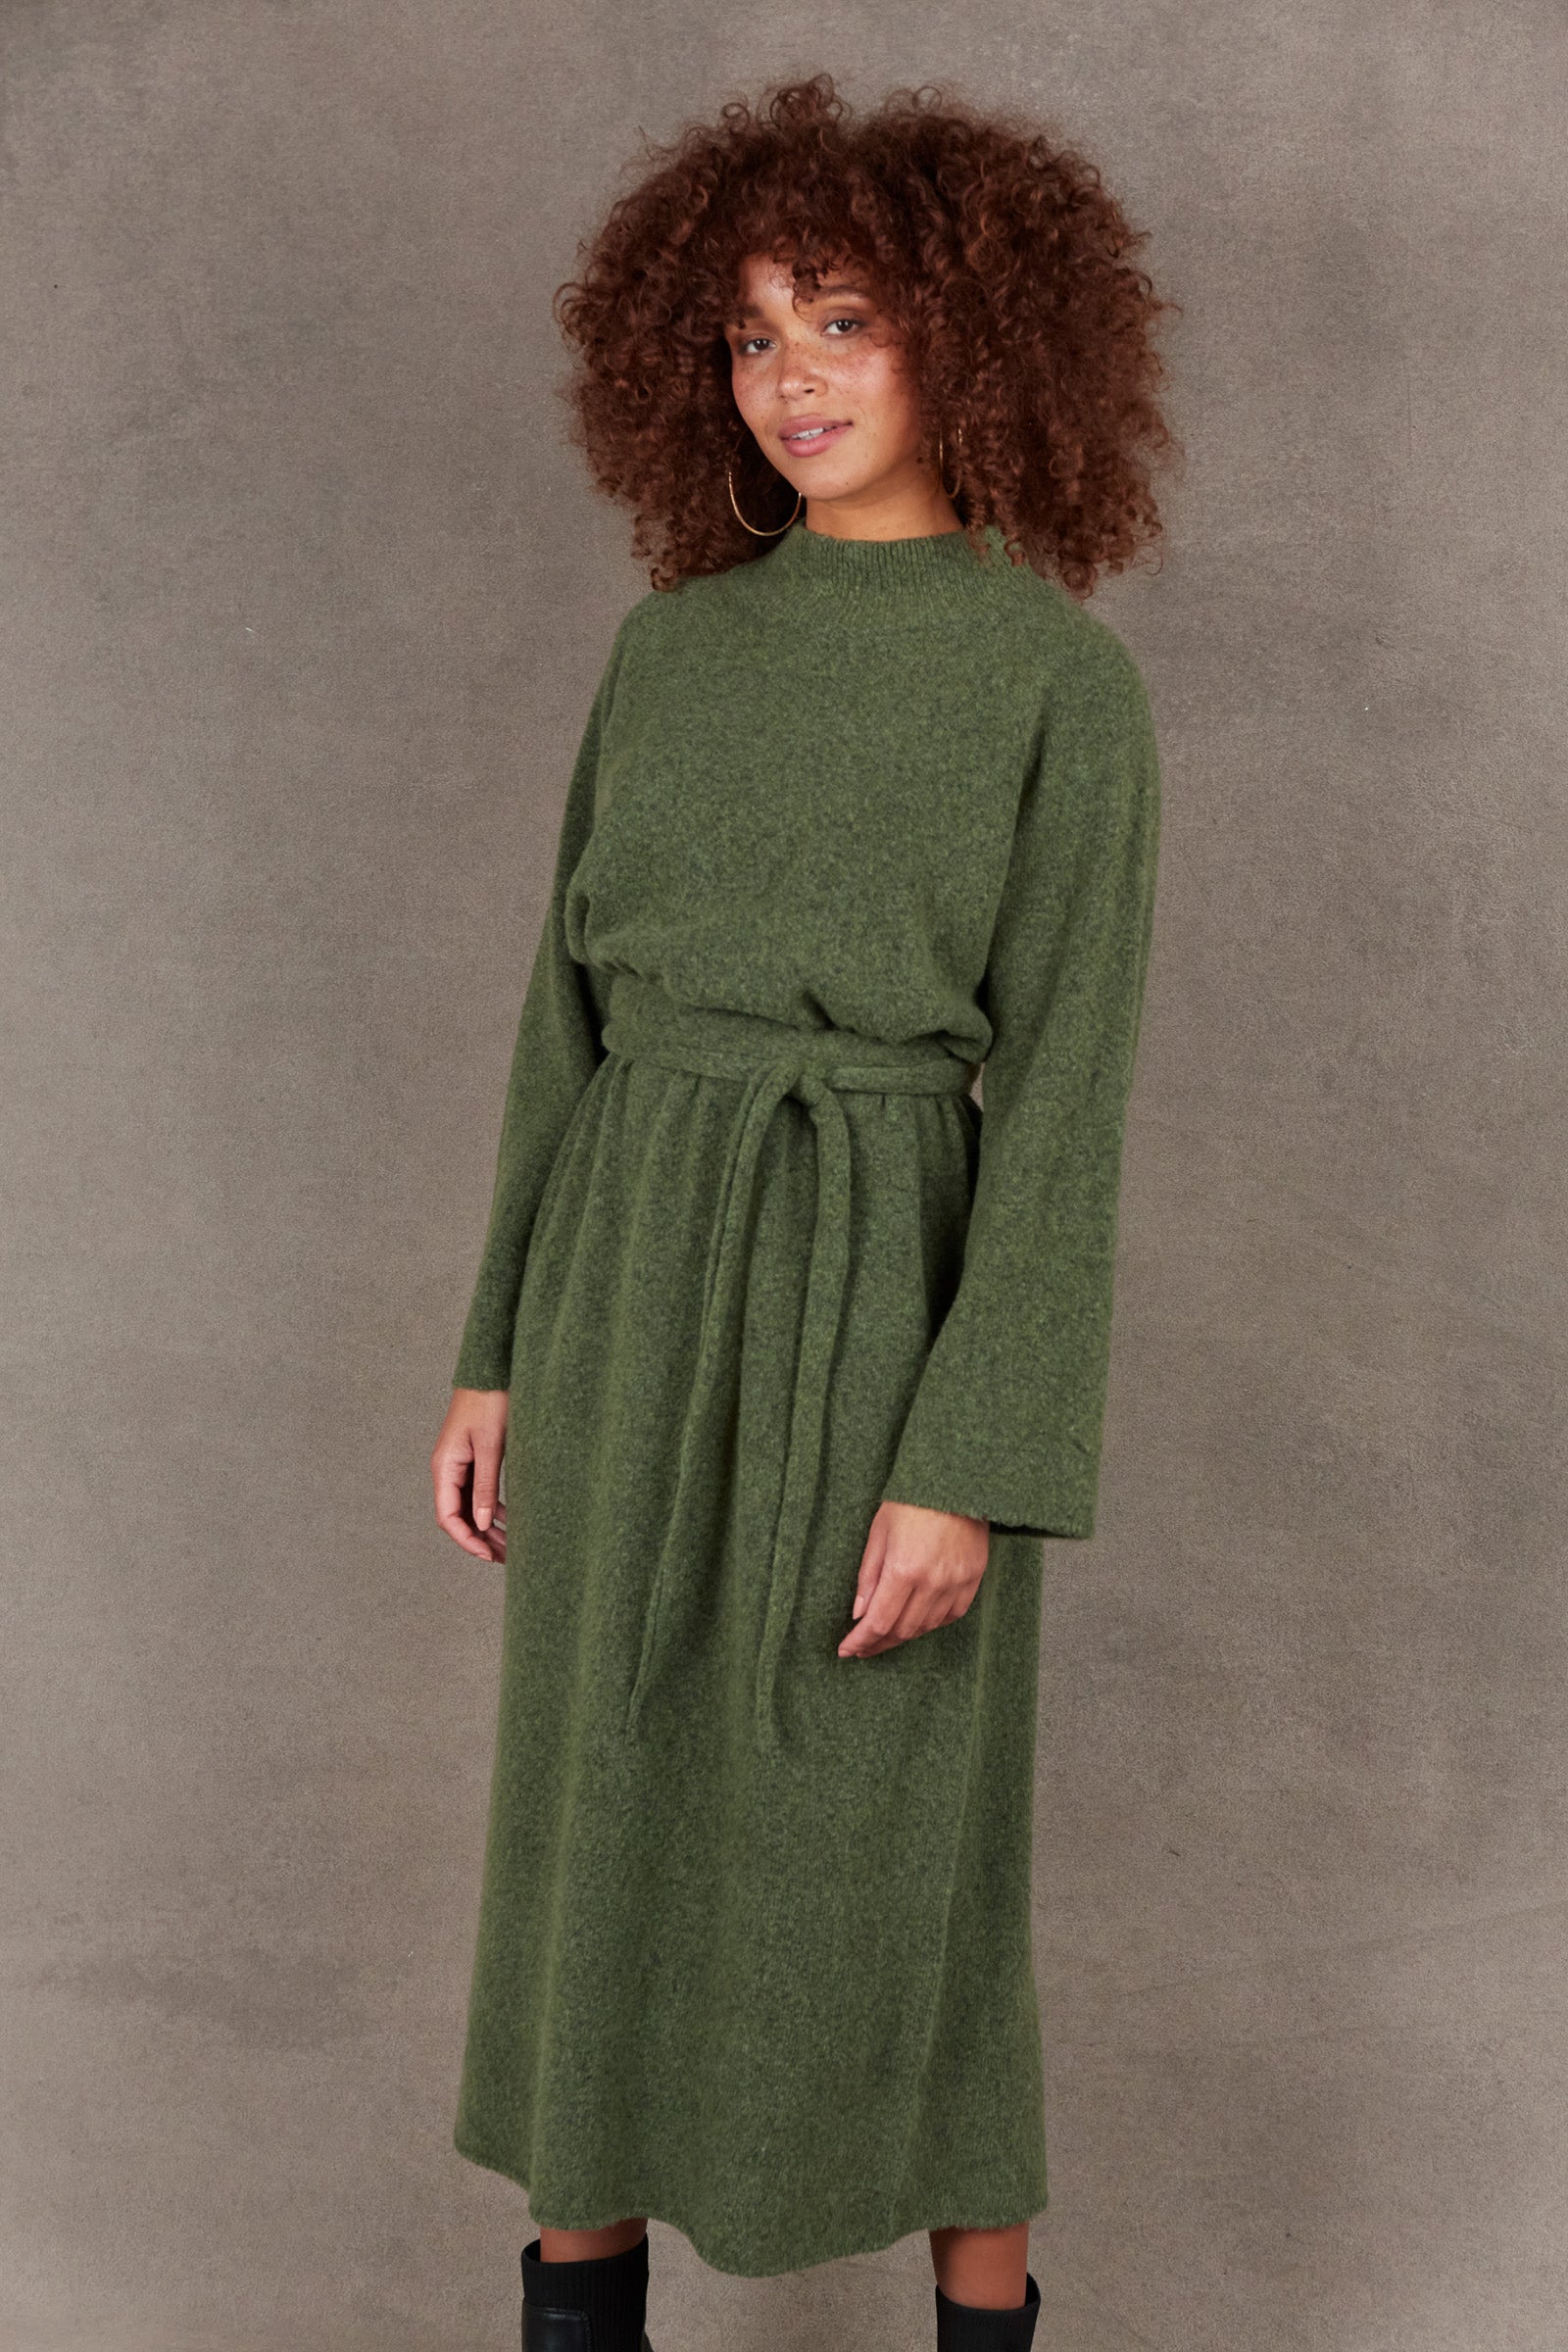 Paarl Tie Knit Dress - Moss - eb&ive Clothing - Knit Dress One Size